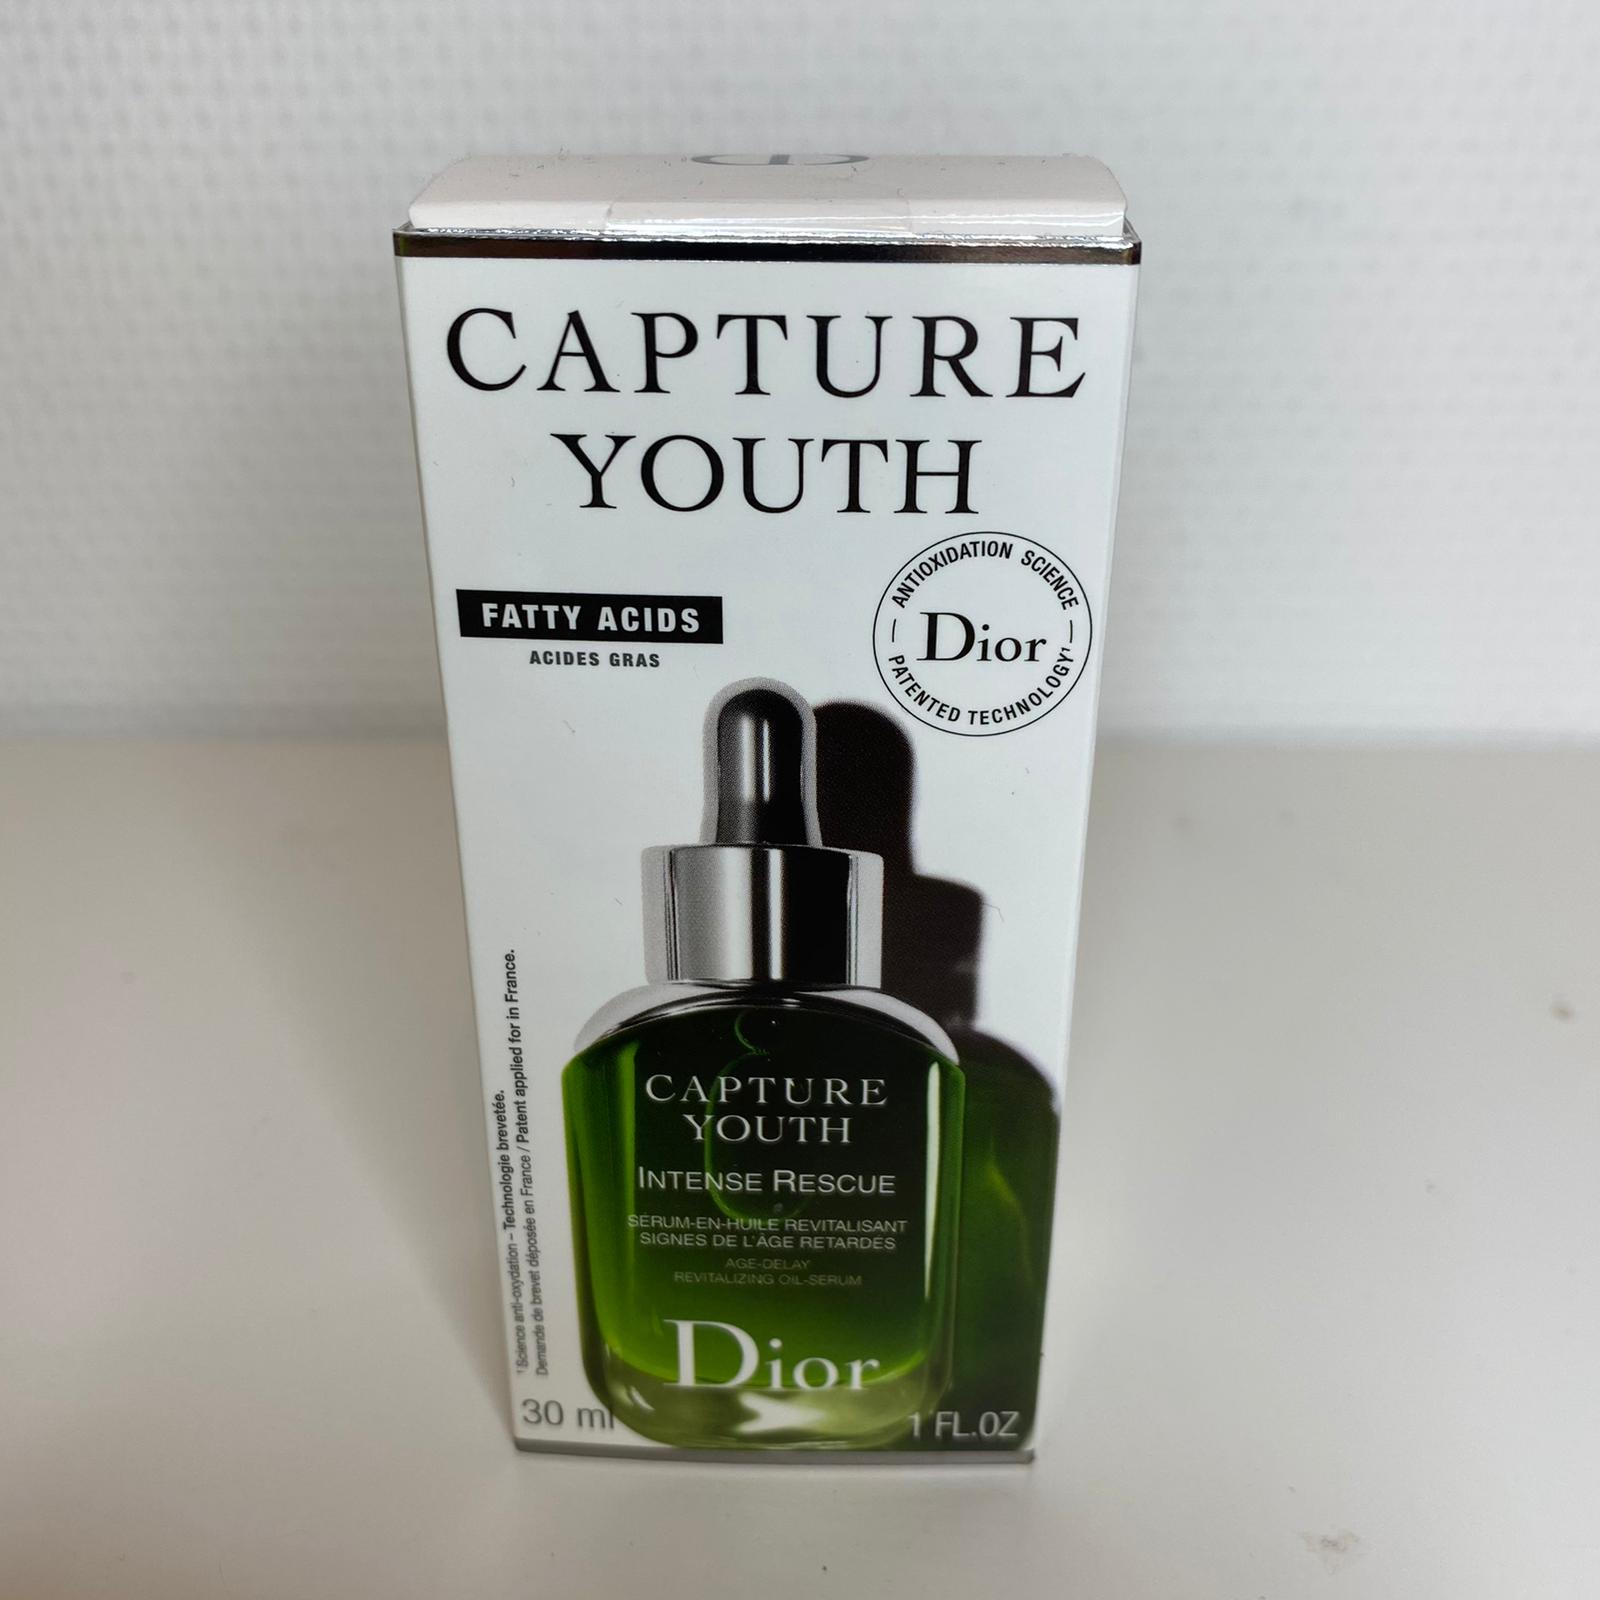 Dior capture youth intense rescue 30 ml